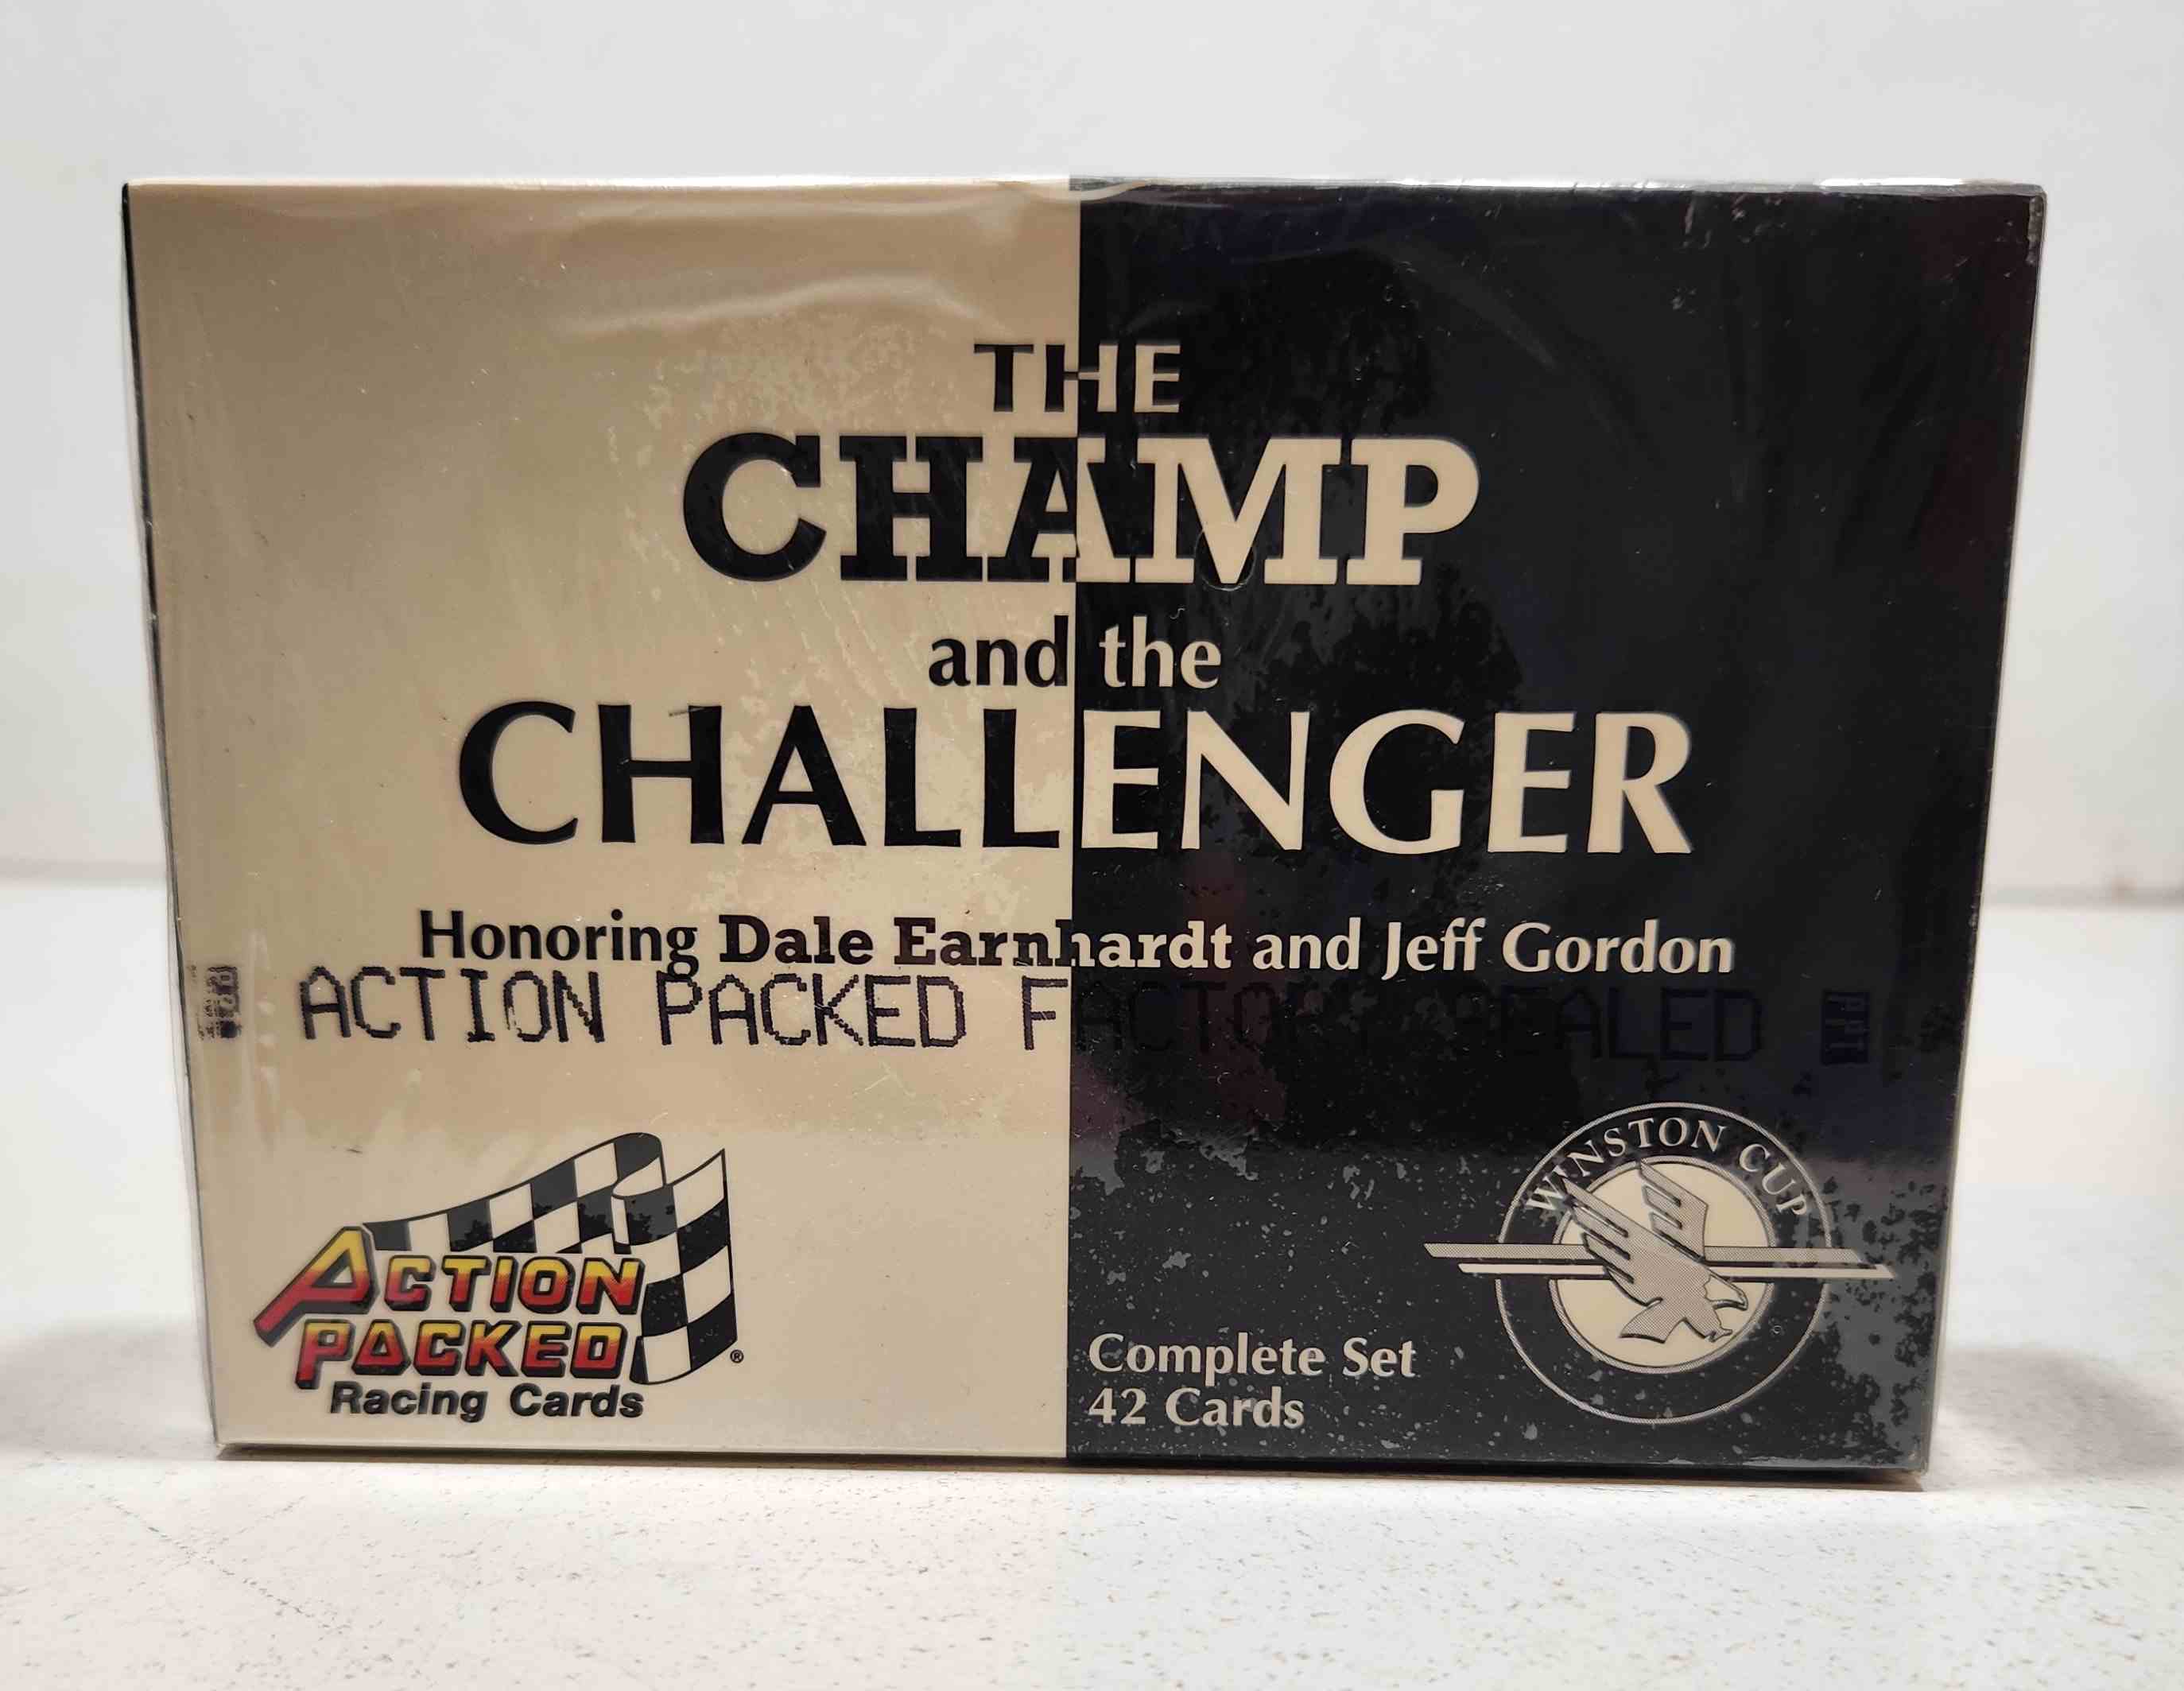 1994 Dale Earnhardt and Jeff Gordon "Champ and the Challenger" 42 card set